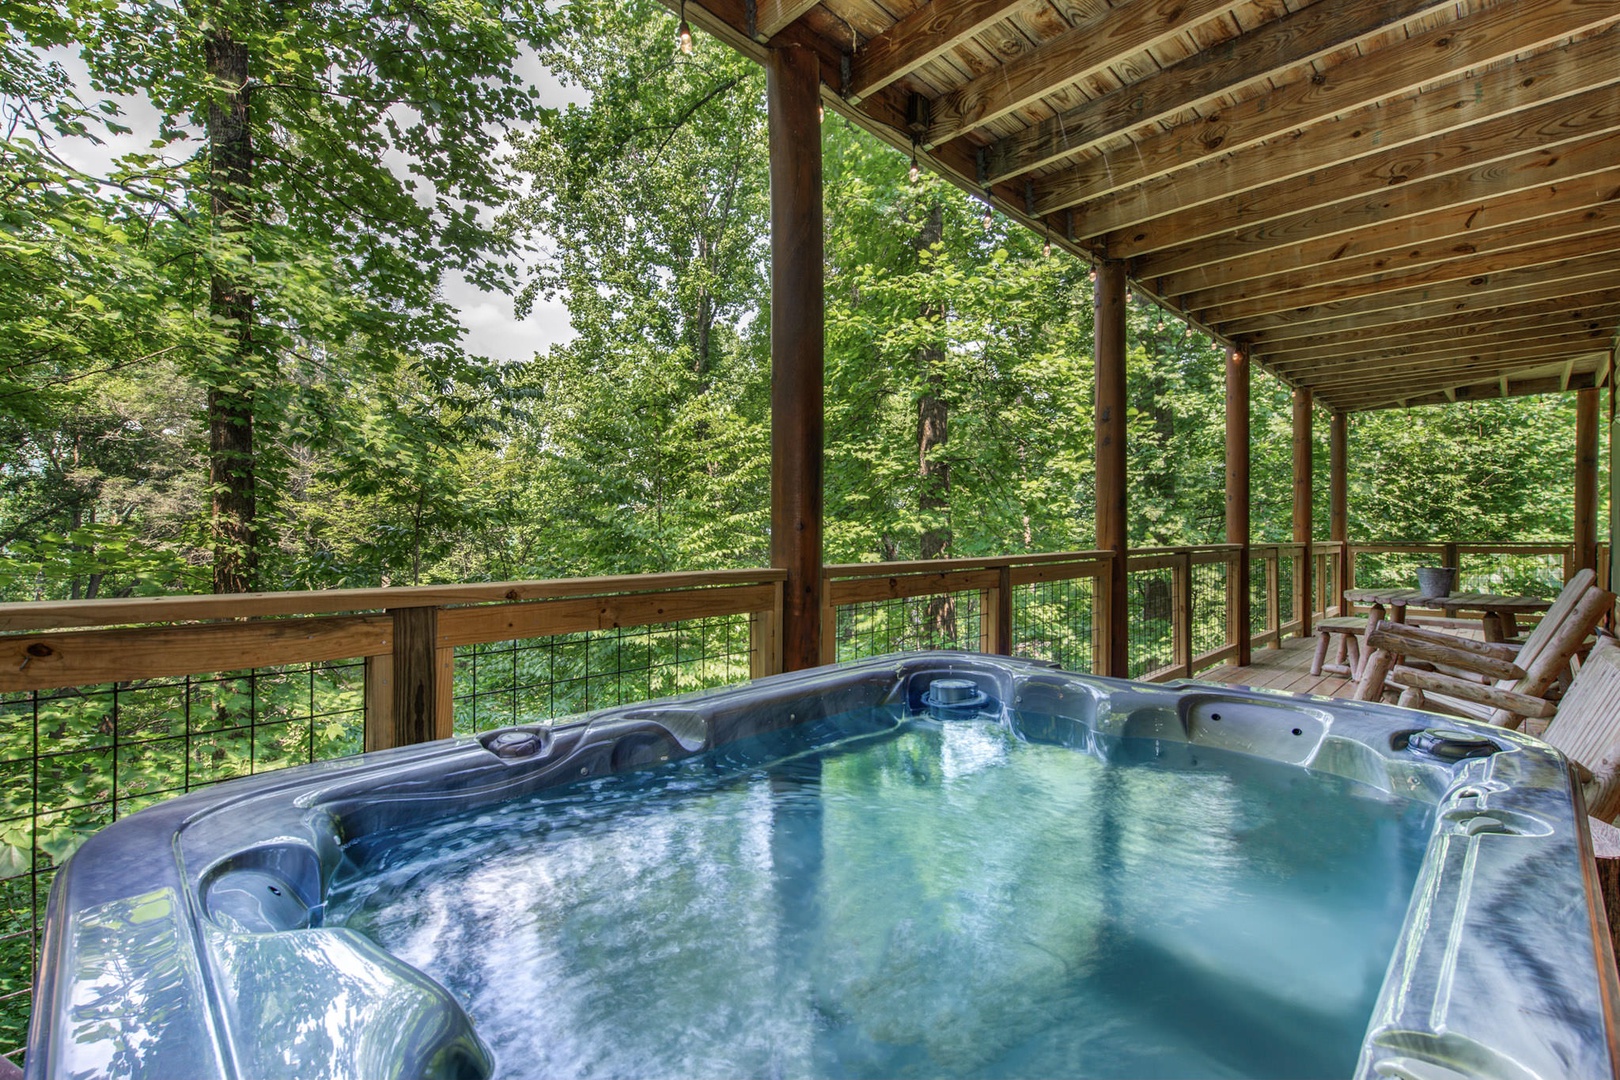 The hot tub is for exclusive use to the guests